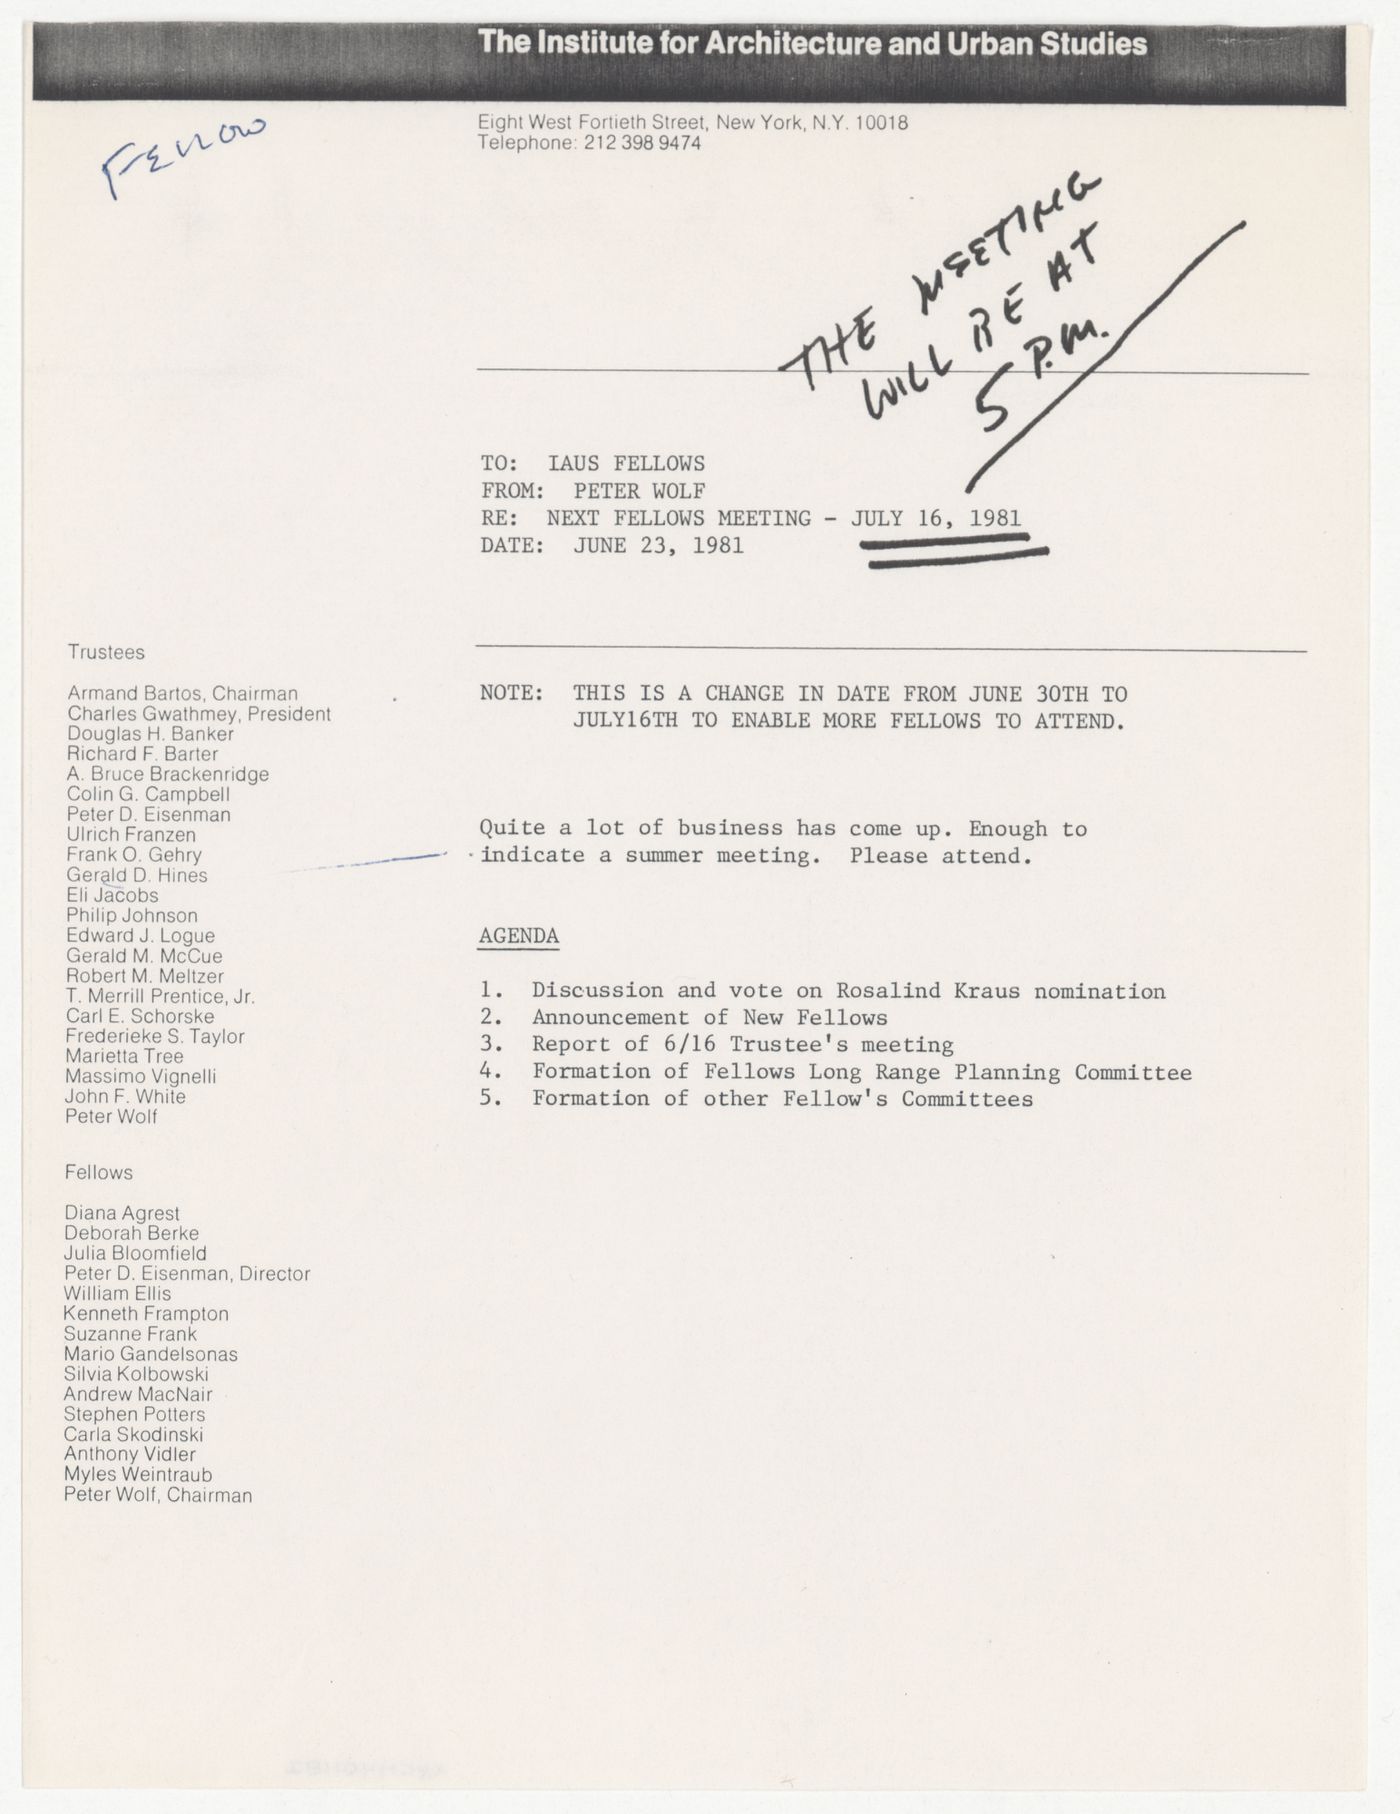 Memorandum with annotation from Peter Wolf to the Fellows about change in date of next Fellows meeting